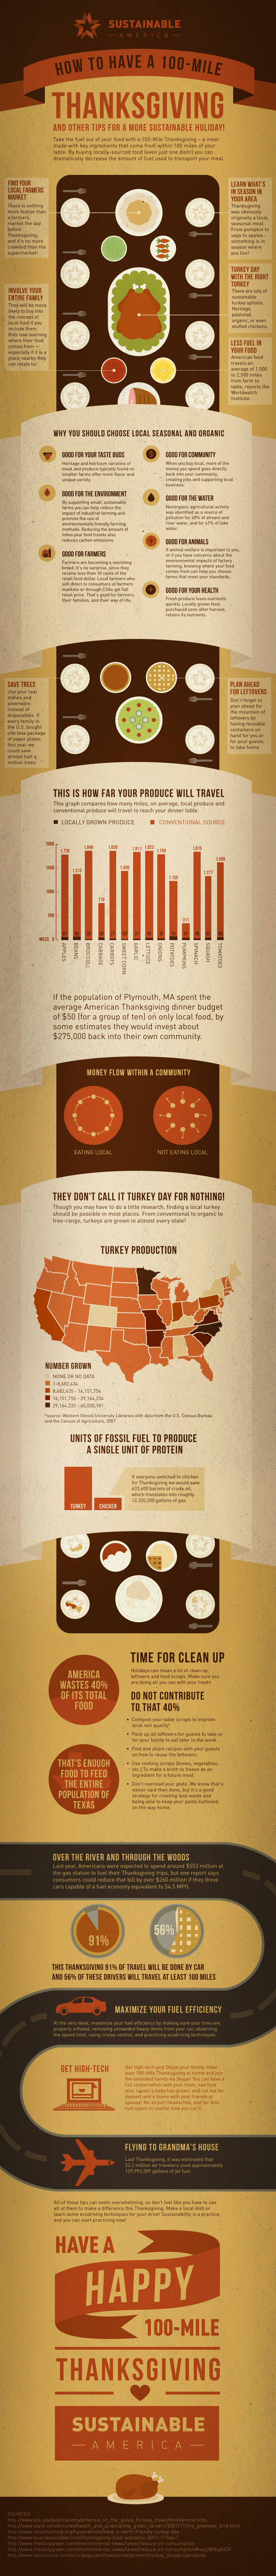 100-mile Thanksgiving infographic from Good magazine